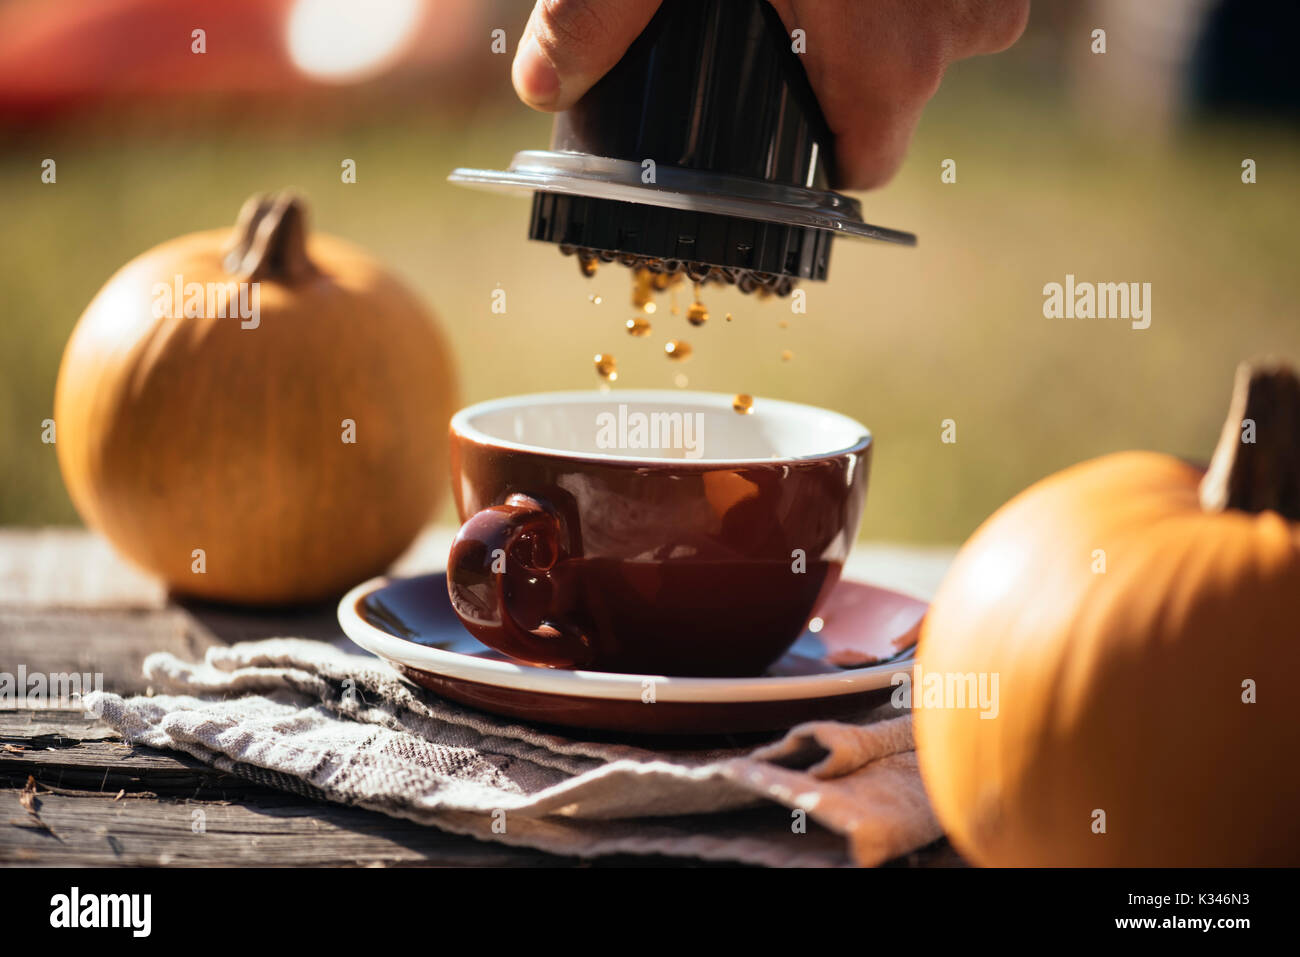 Man brewing filter coffee outdoor, at the autumn coffee picnic, on the old damaged wooden table background. Coffee drips captured in motion in the pro Stock Photo